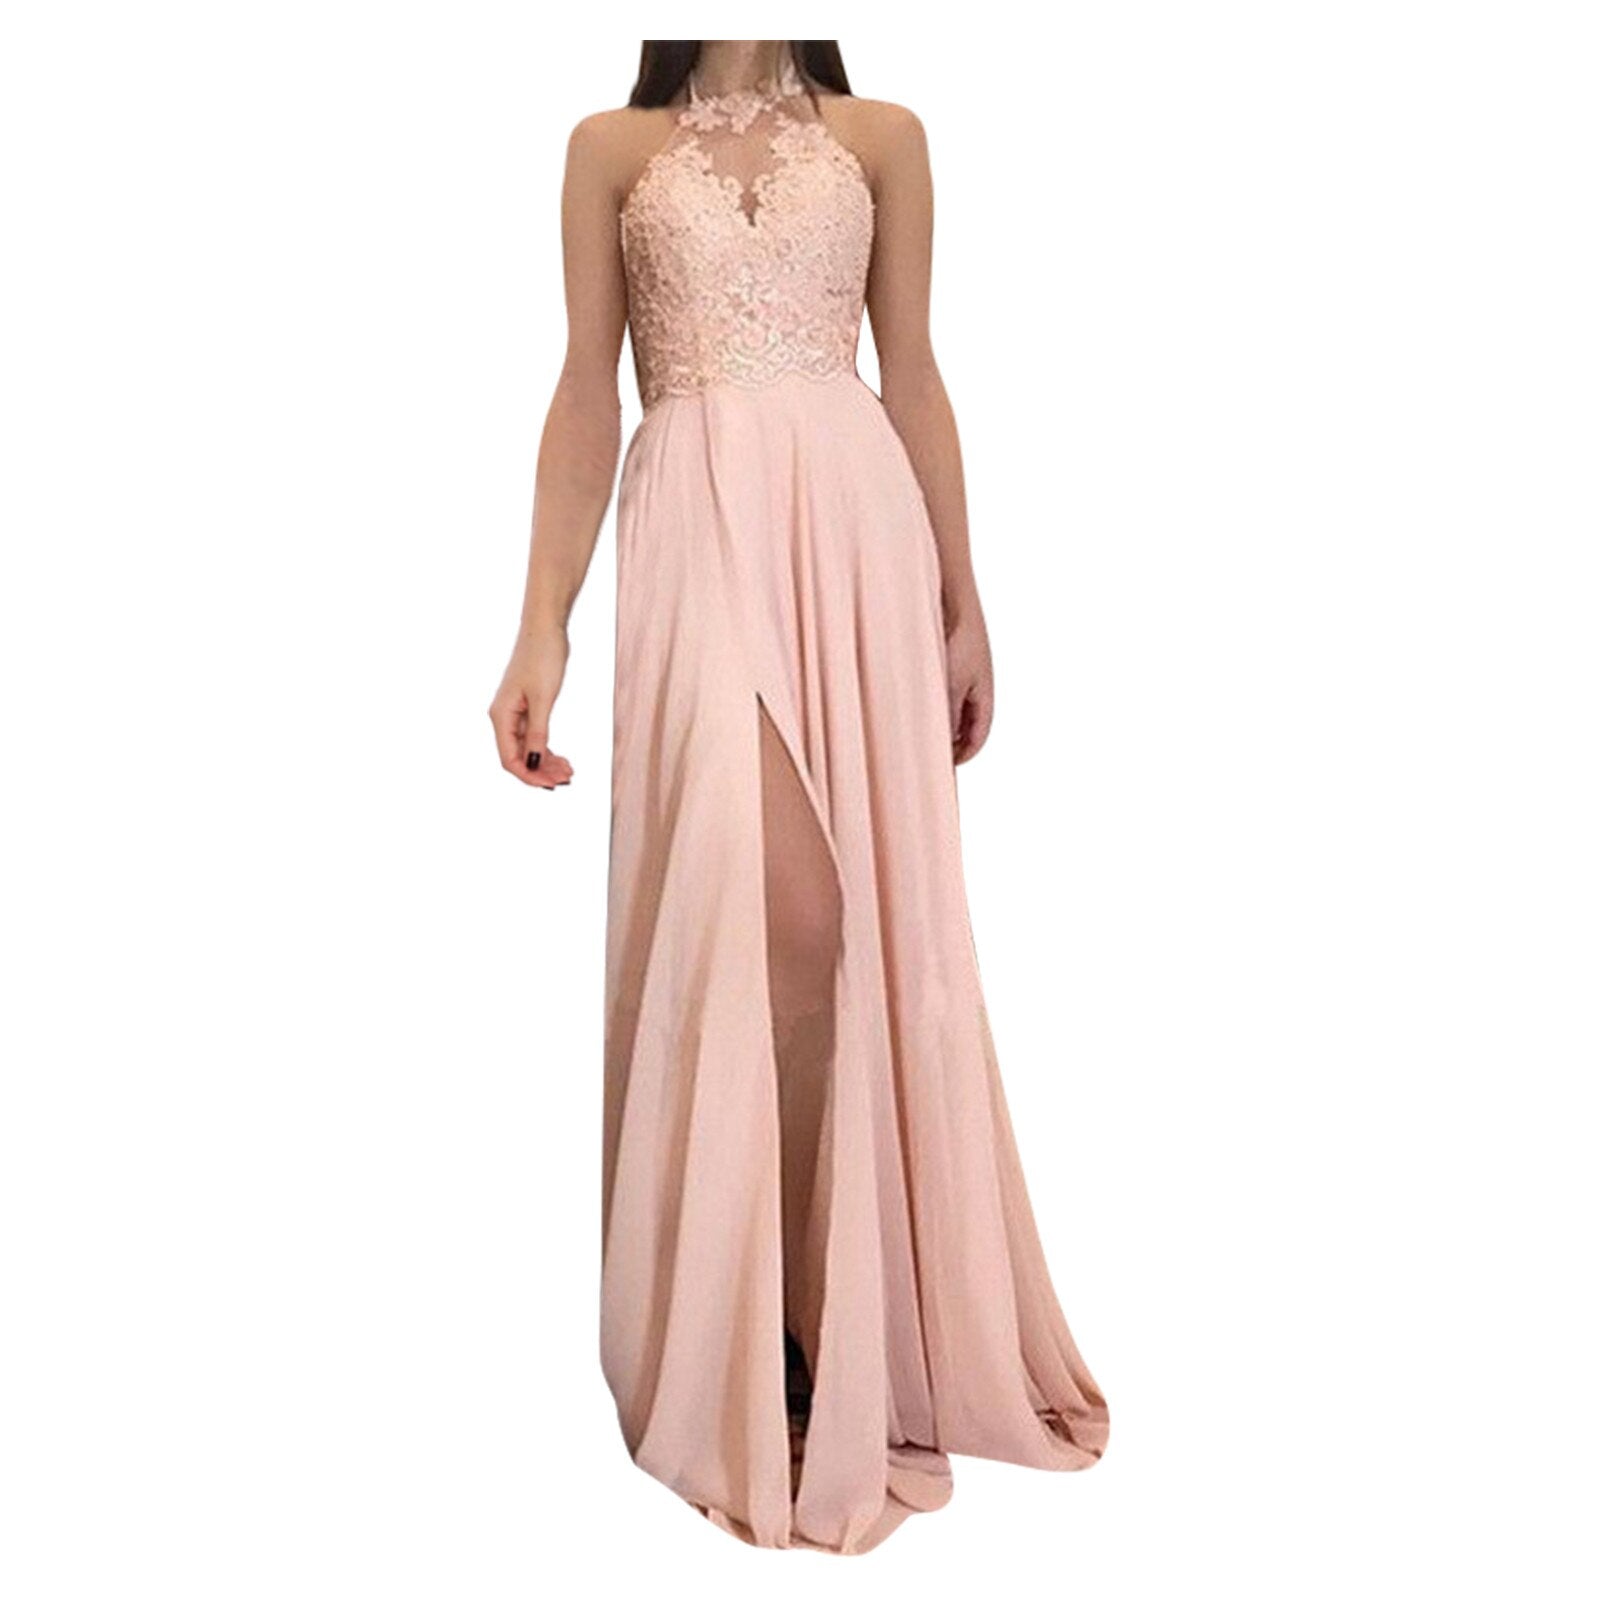 Sexy Lace Backless Halter Maxi Dress